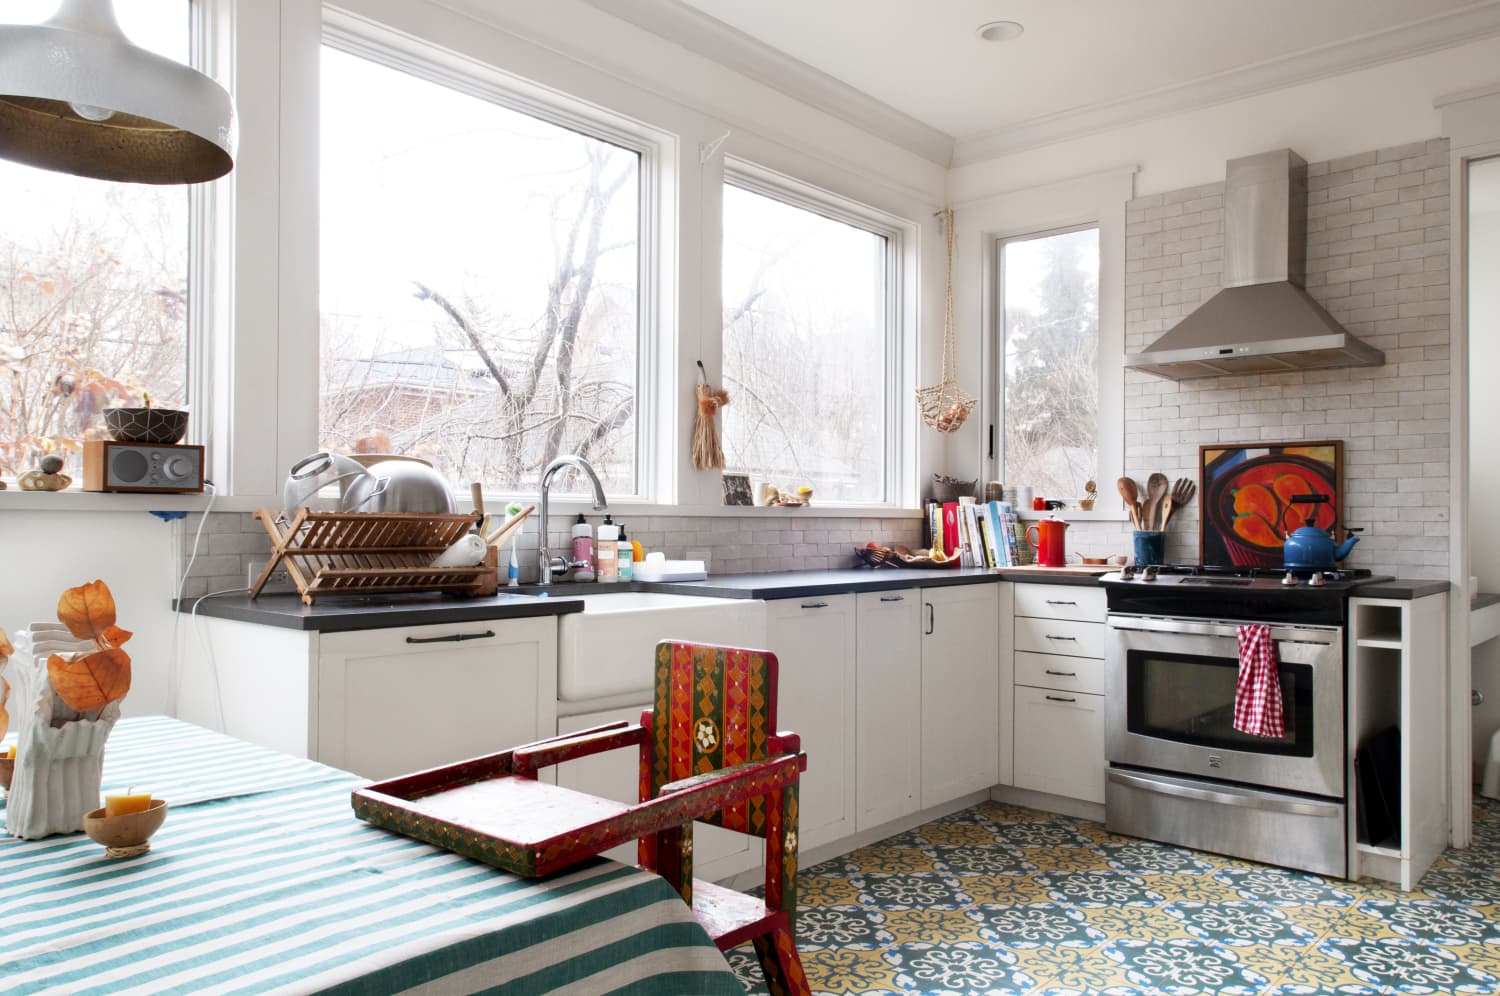 Our Family of 7 Uses Our Kitchen Constantly— Here Are 5 Tricks We Use to Keep It Spotless